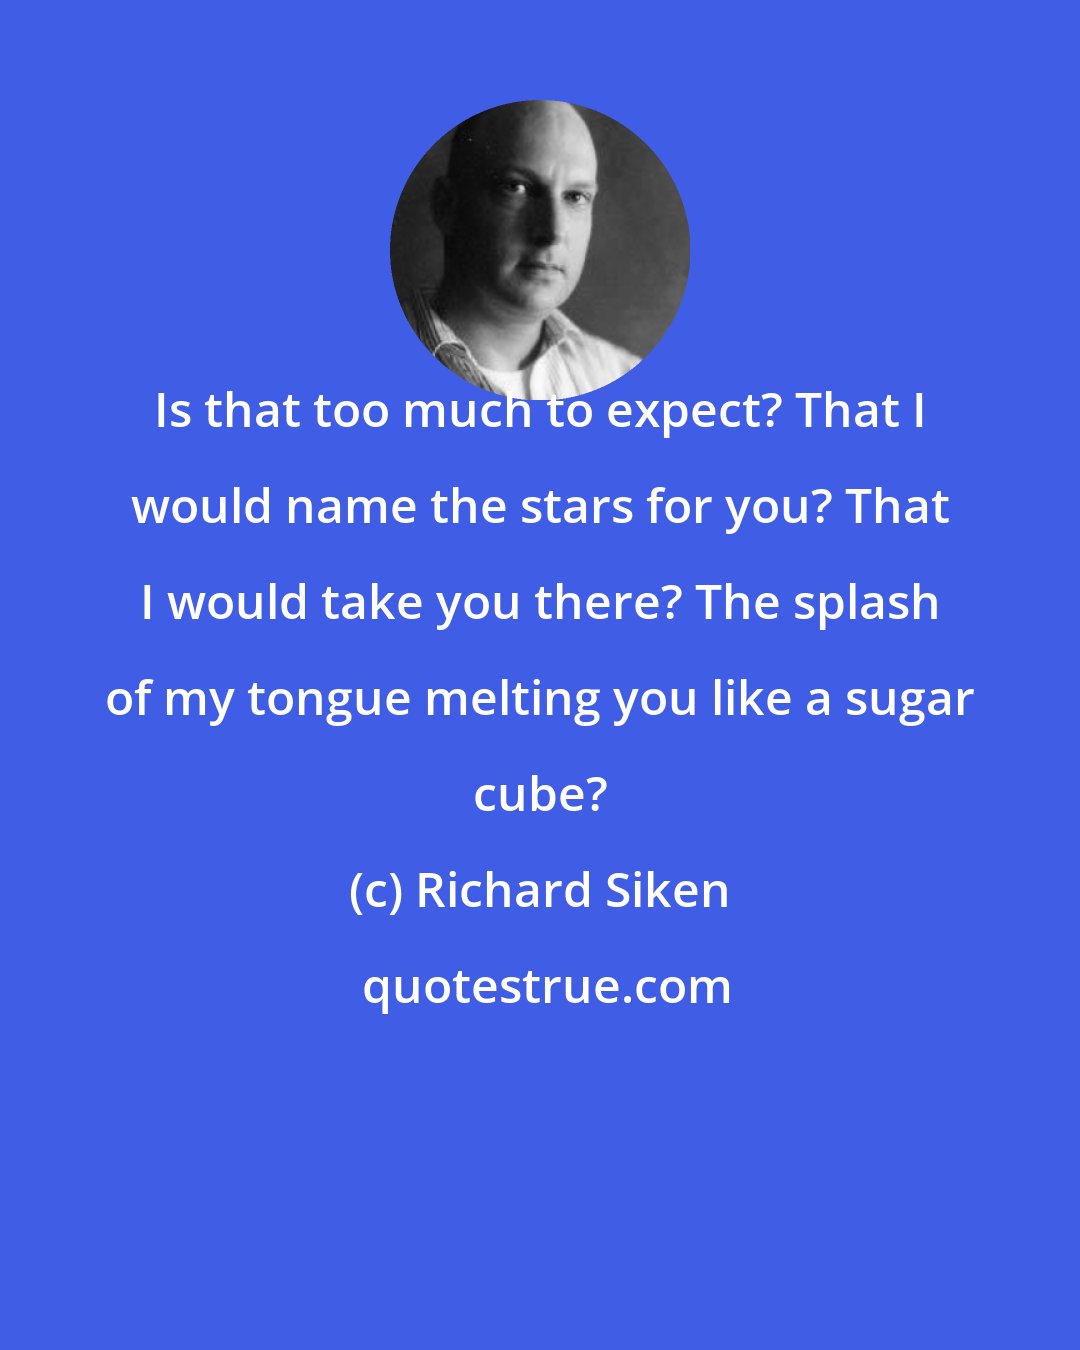 Richard Siken: Is that too much to expect? That I would name the stars for you? That I would take you there? The splash of my tongue melting you like a sugar cube?